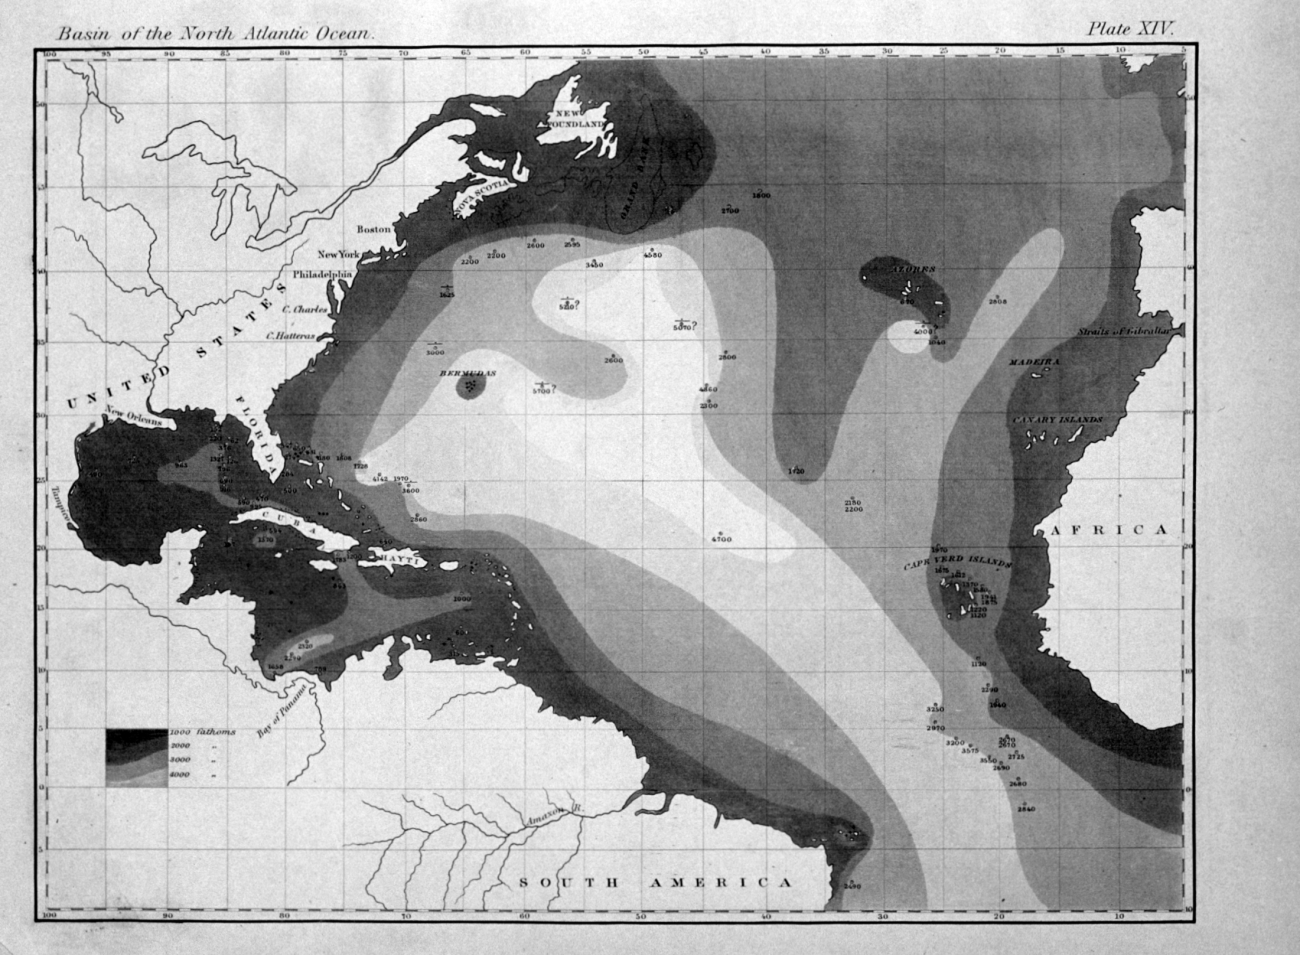 The very earliest rendition of a bathymetric map of an oceanic basin